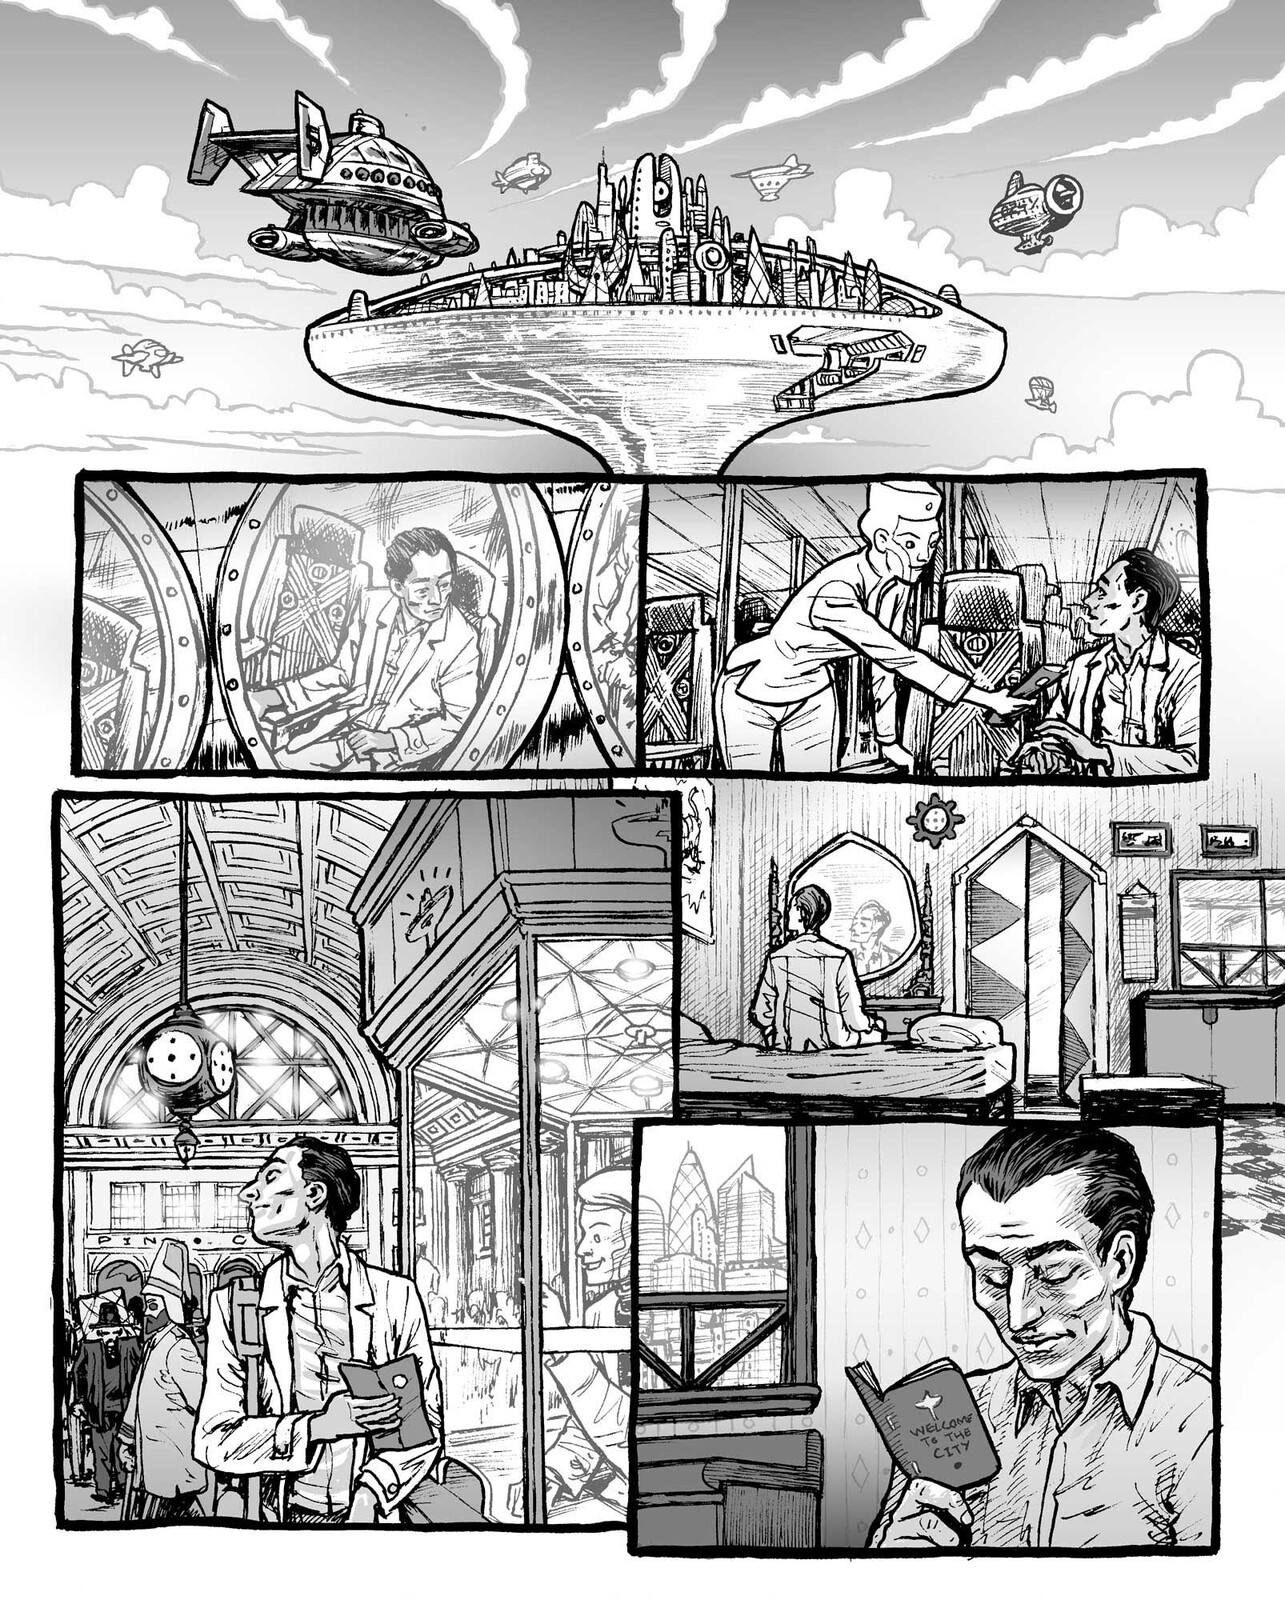 A page from The New Armageddon Blues.